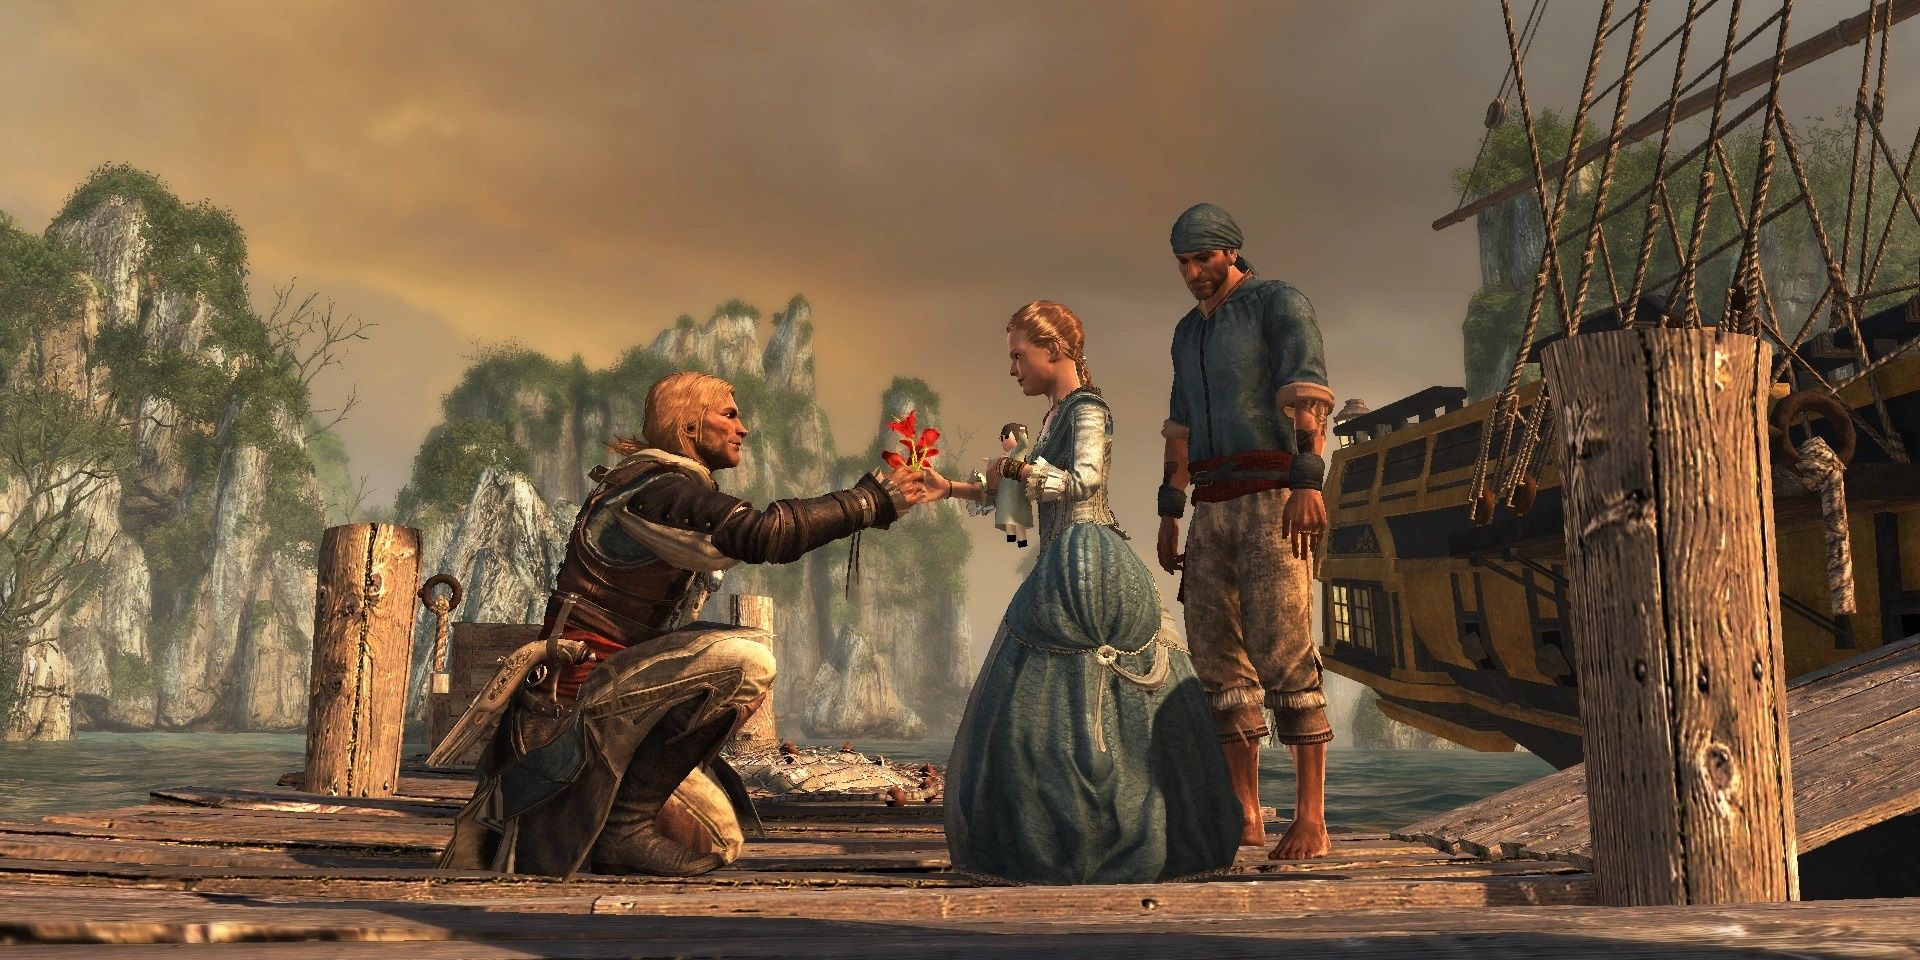 Edward Kenway meets his daughter at the end of Assassin's Creed IV: Black Flag